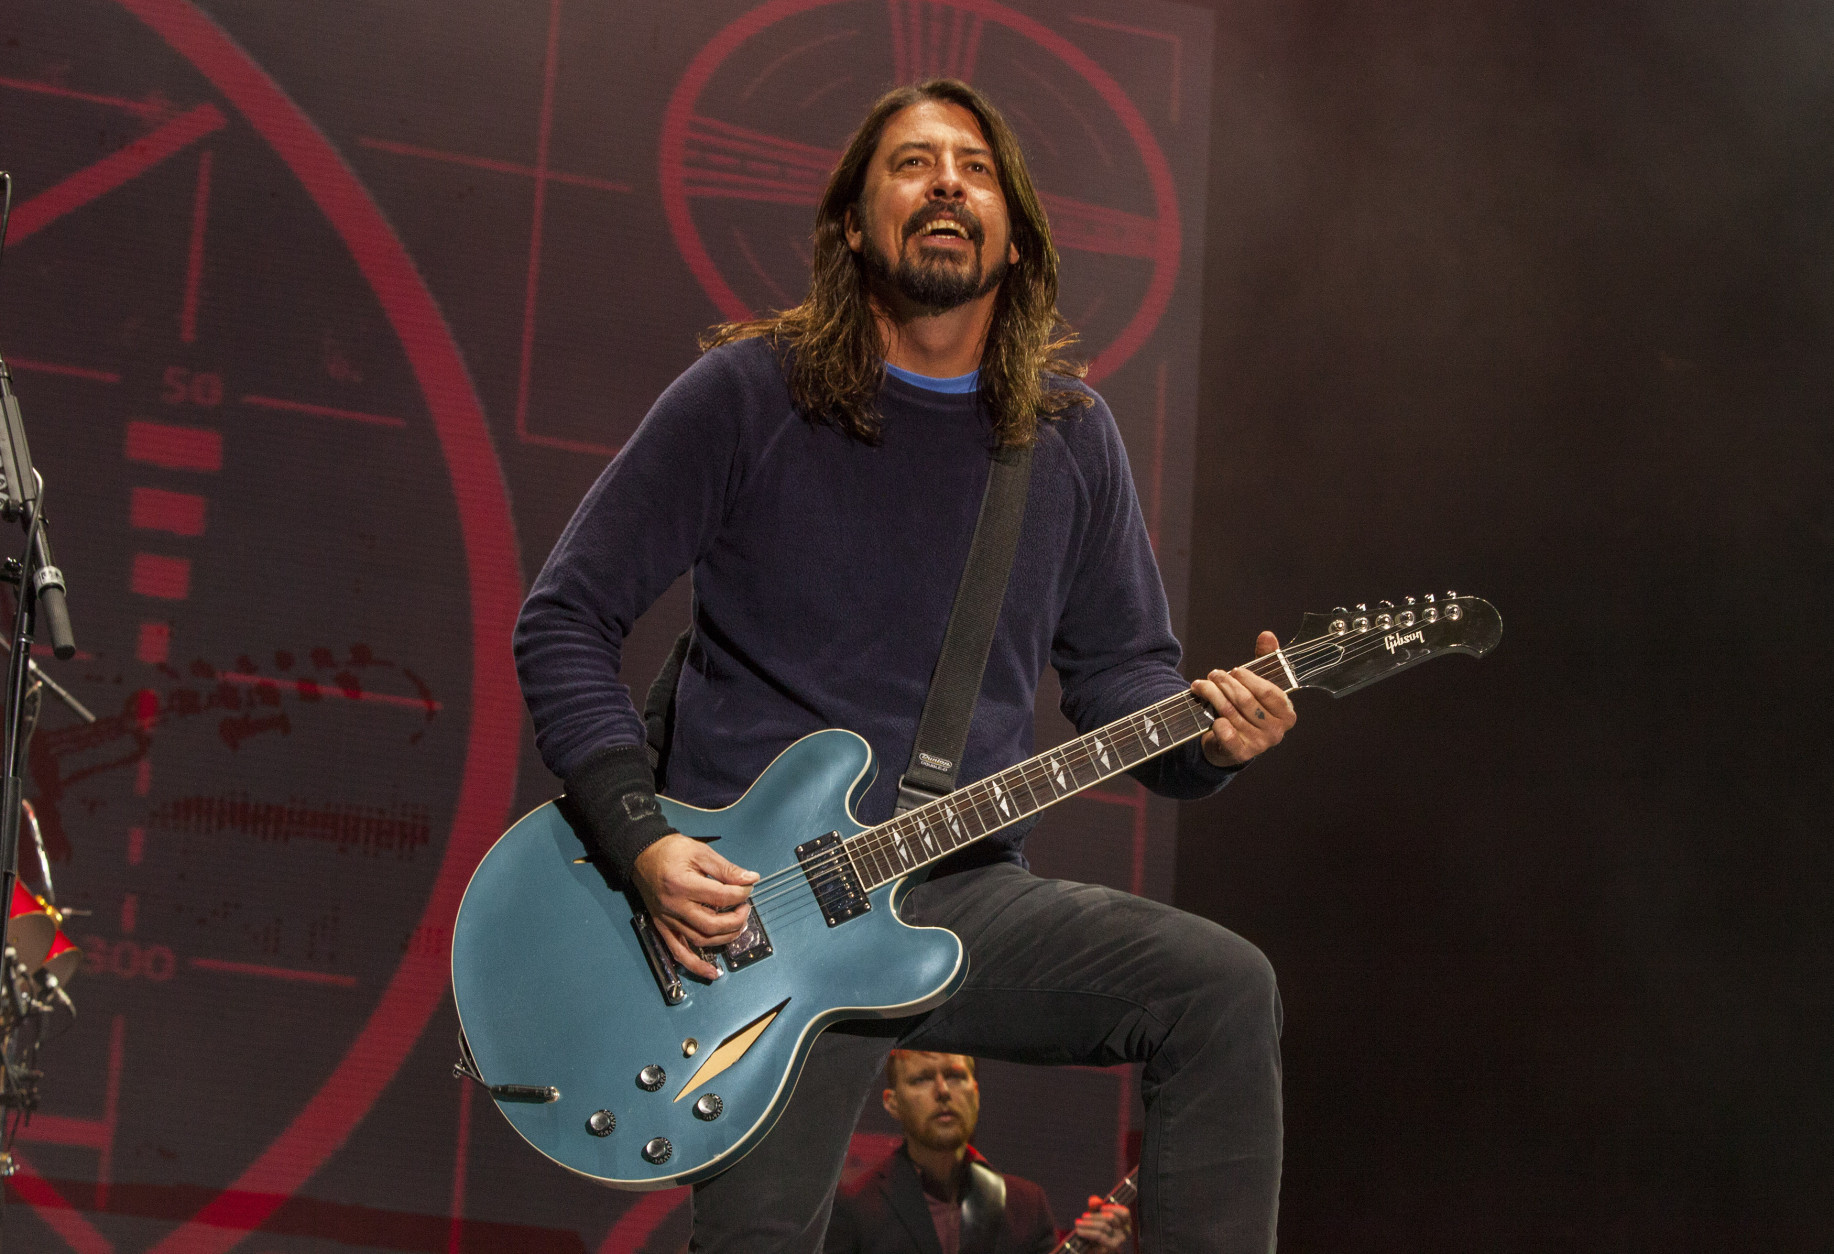 FILE - In this Nov. 2, 2014 file photo, Dave Grohl of the Foo Fighters performs at the Voodoo Music Experience in New Orleans. Grohl managed to finish a concert with a broken ankle, but he cant finish the Foo Fighters tour. The Foo Fighters announced Tuesday, June 16, 2015, that theyre canceling the rest of their European tour after Grohl was injured in fall on stage in Sweden on Friday, June 12.  (Photo by Barry Brecheisen/Invision/AP, File)